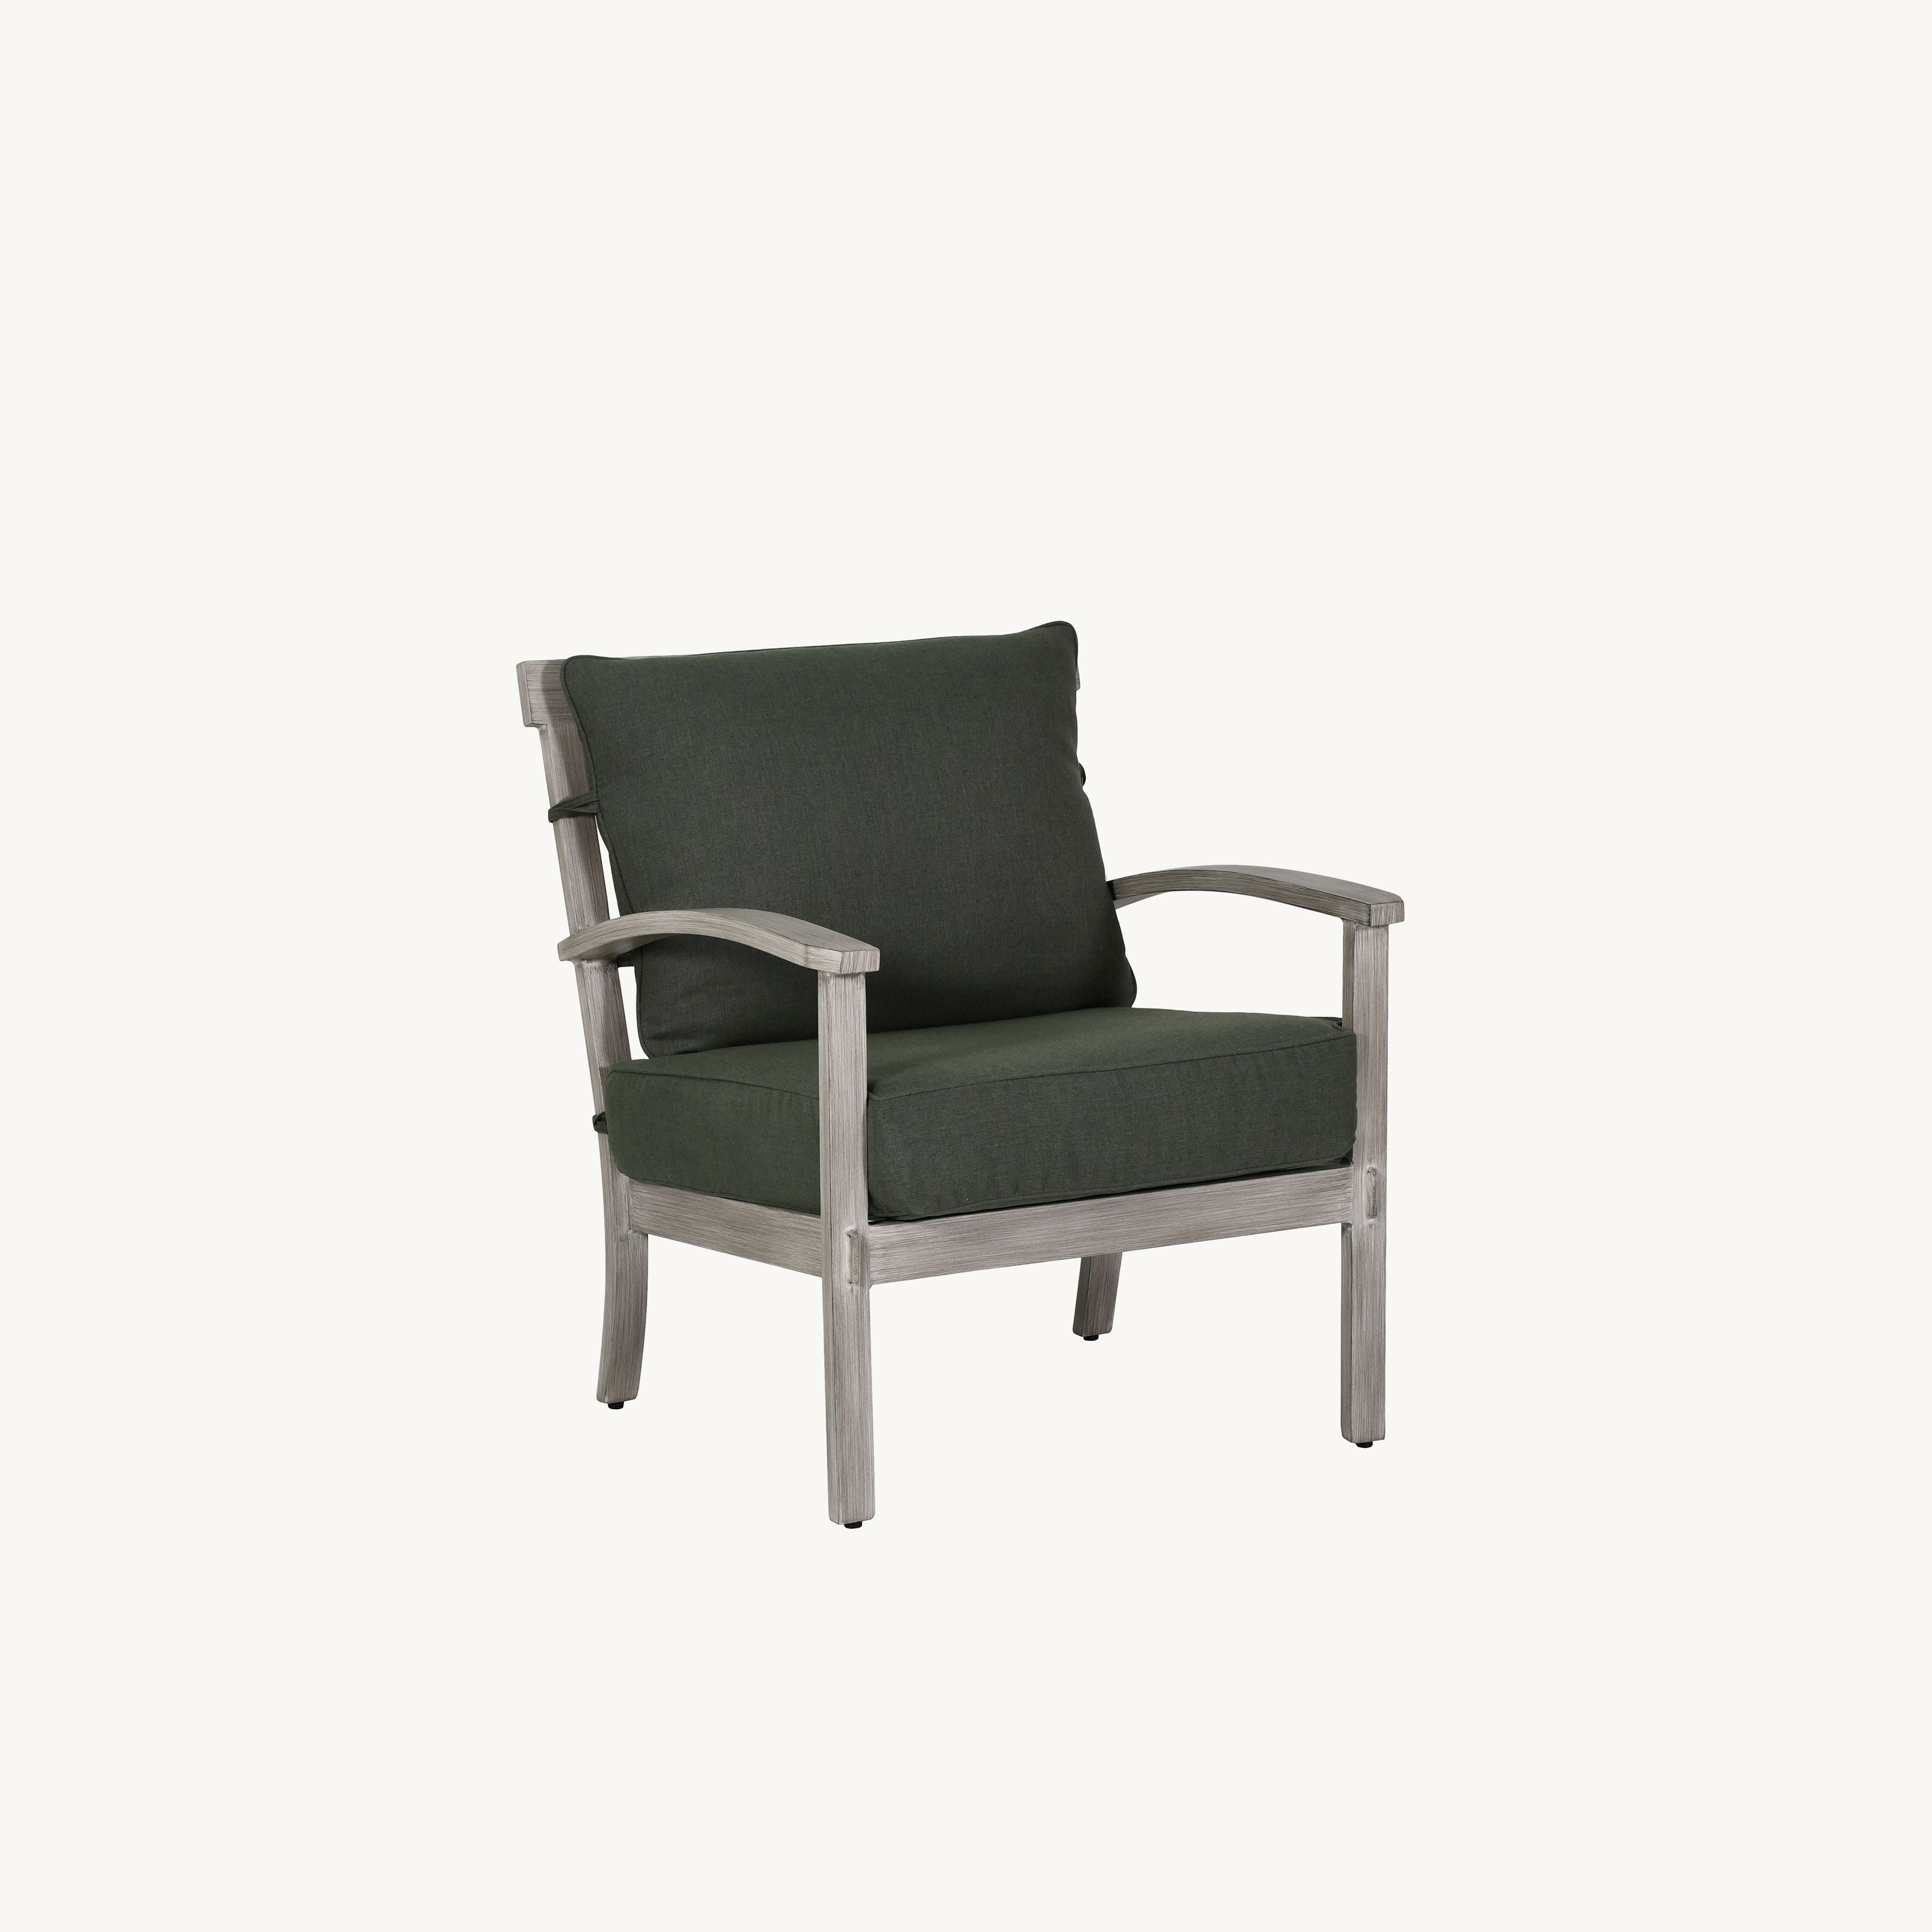 Antler Hill Cushioned Lounge Chair By Castelle